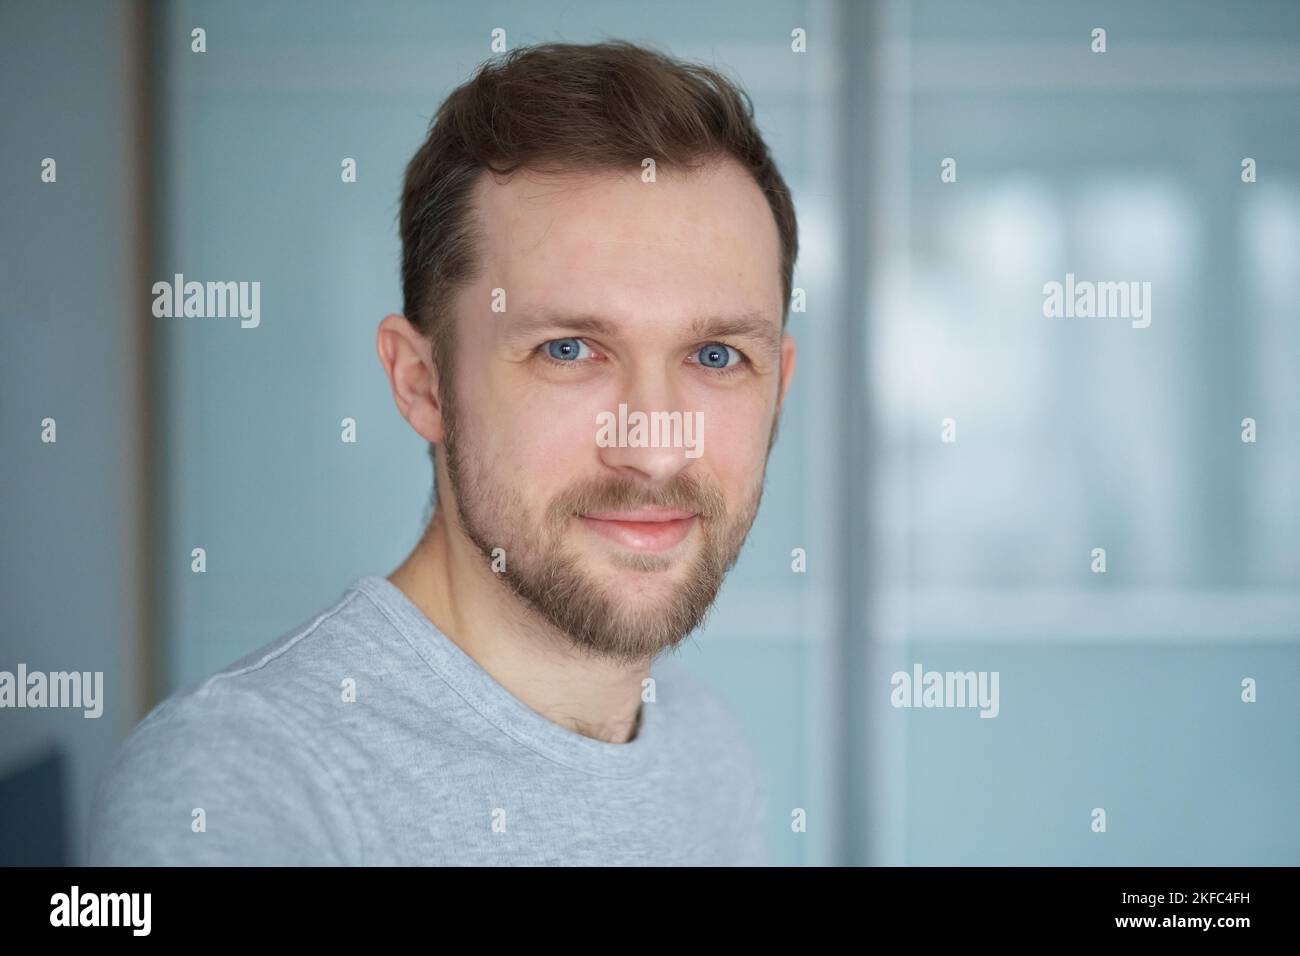 Close-up portrait of young handsome caucasian man in grey t-shirt looking in camera, positive emotion - smiling. Attractive bearded male in home office. Smart tech concept. High quality image Stock Photo